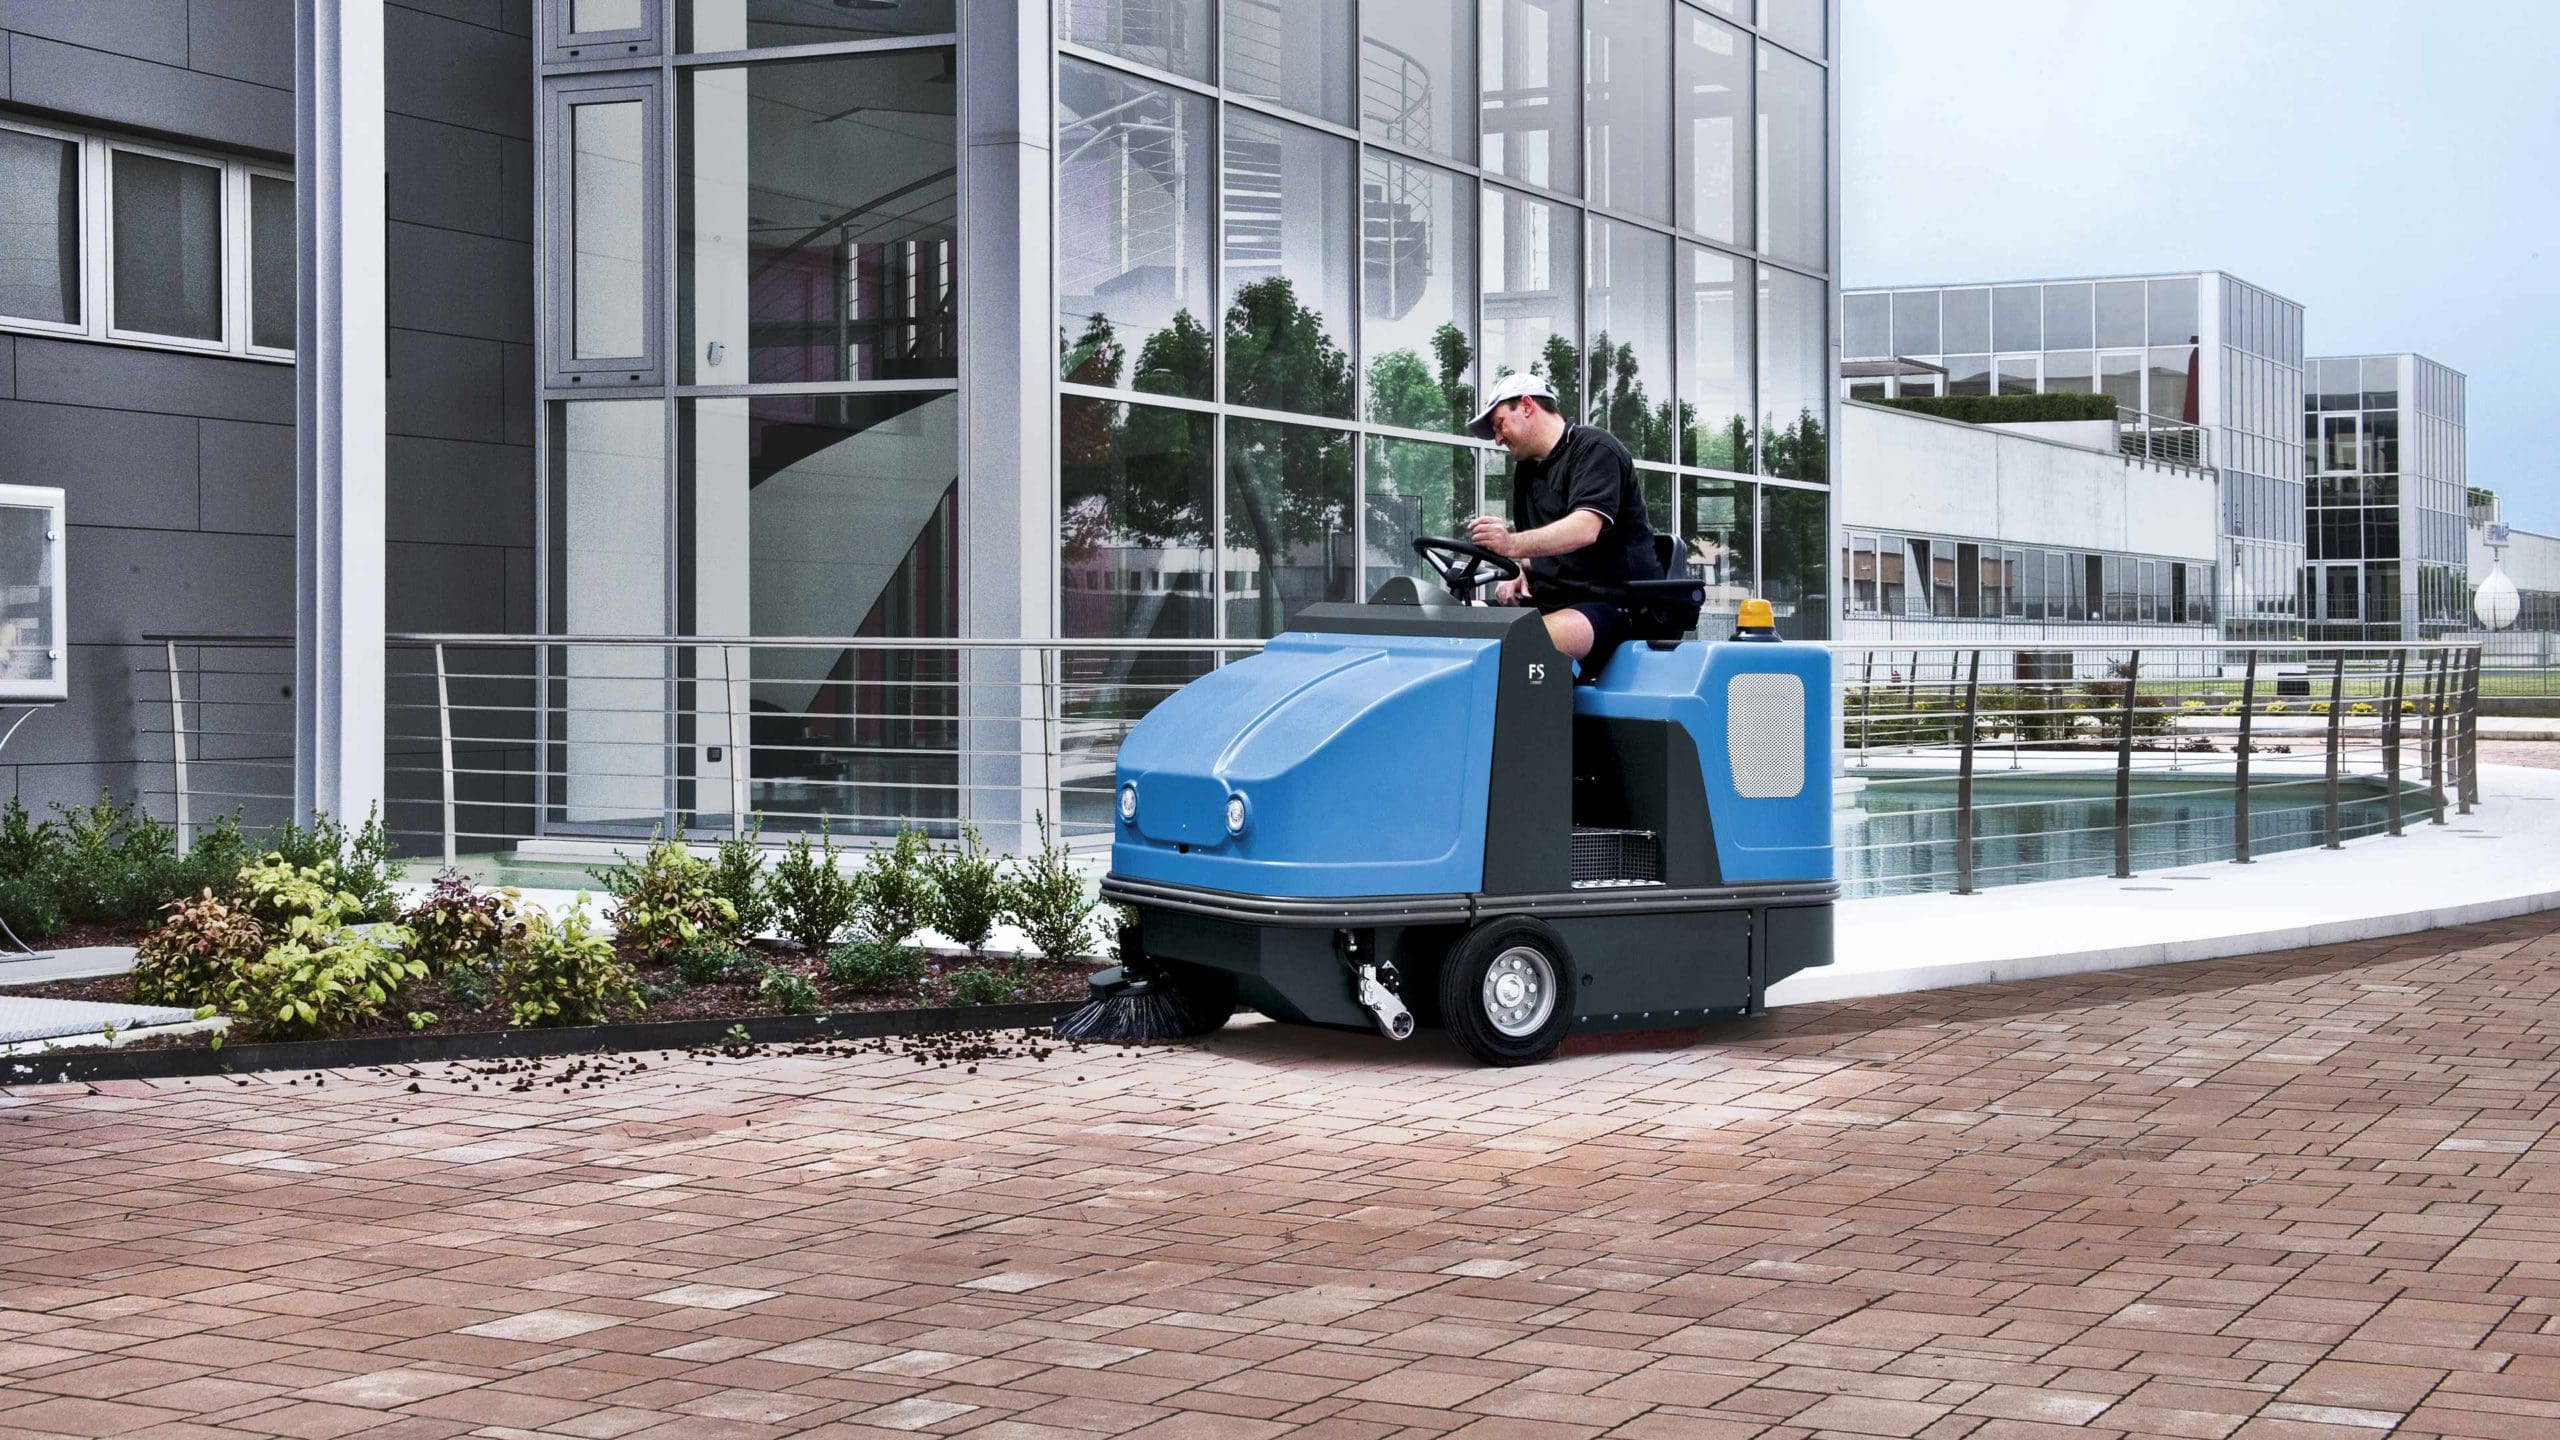 Ride On Sweepers For Sale Australia - Sweeper Machine Sales